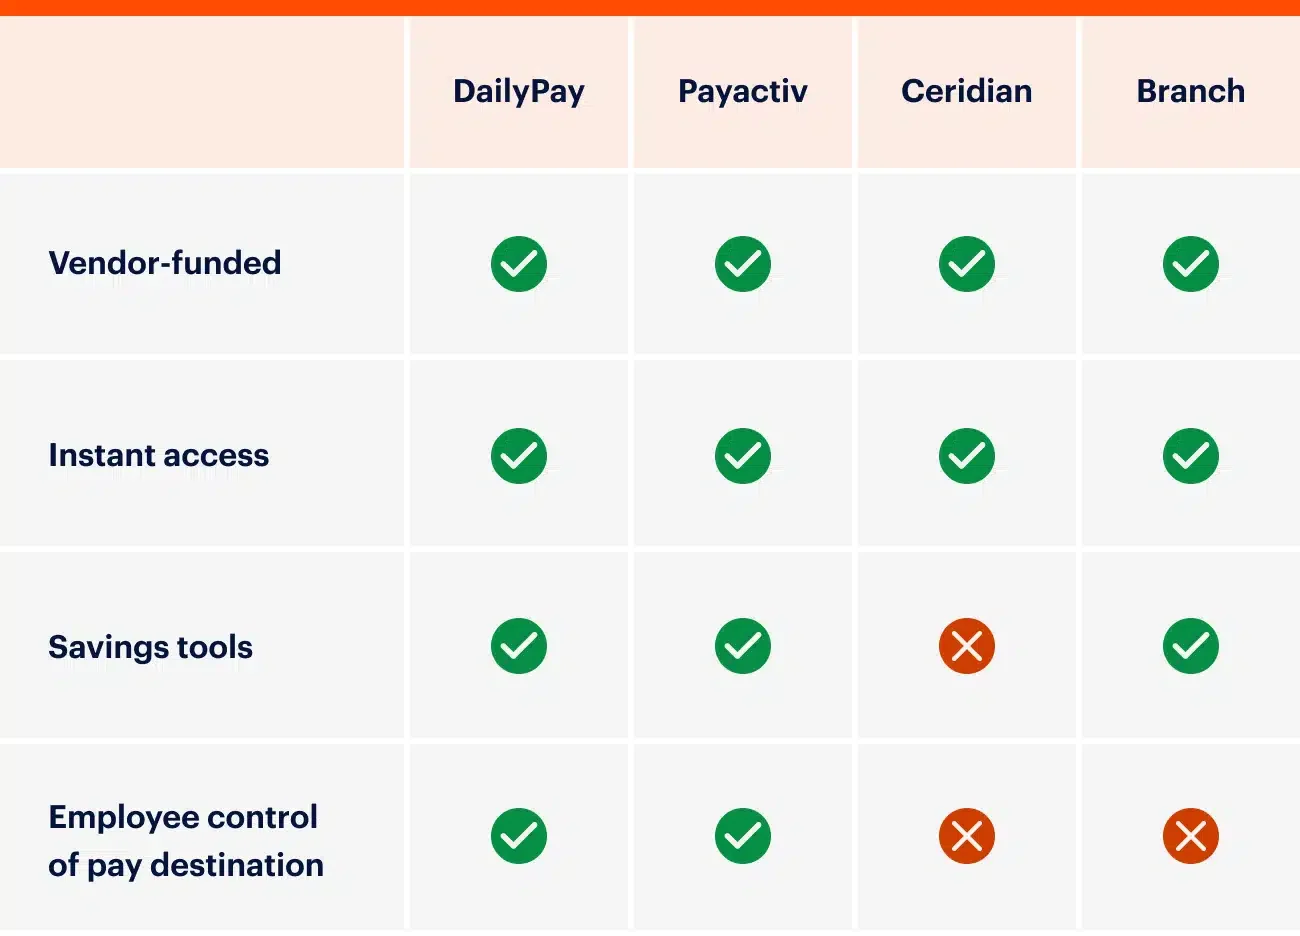 Comparison chart showing features of DailyPay, Payactiv, Ceridian, and Branch. Each row lists earned wage access: Vendor-funded, Instant access, Savings tools, Employee control of pay destination, with checkmarks or Xs.